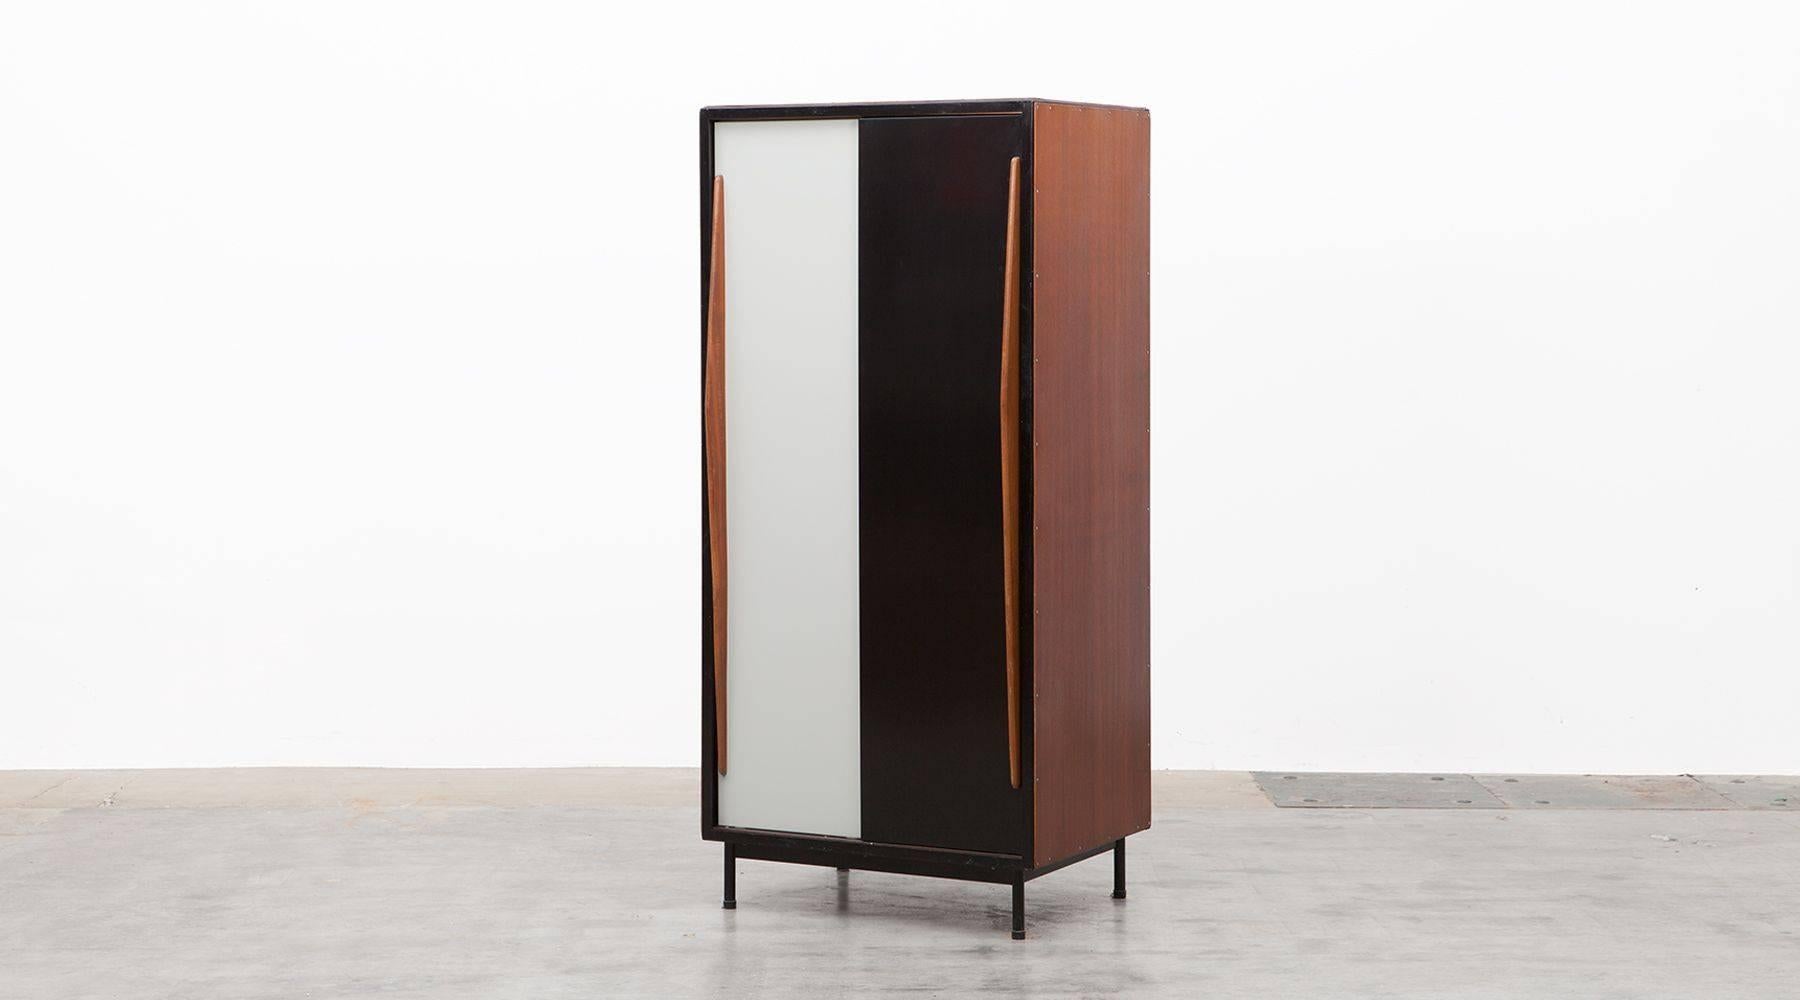 This standing cabinet with lacquered metal doors in black and light grey and wooden door handles, slides from left and right. Contains wardrobe on one side and two shelfs on the other side. Nice early example of Industrial Design from the Belgium